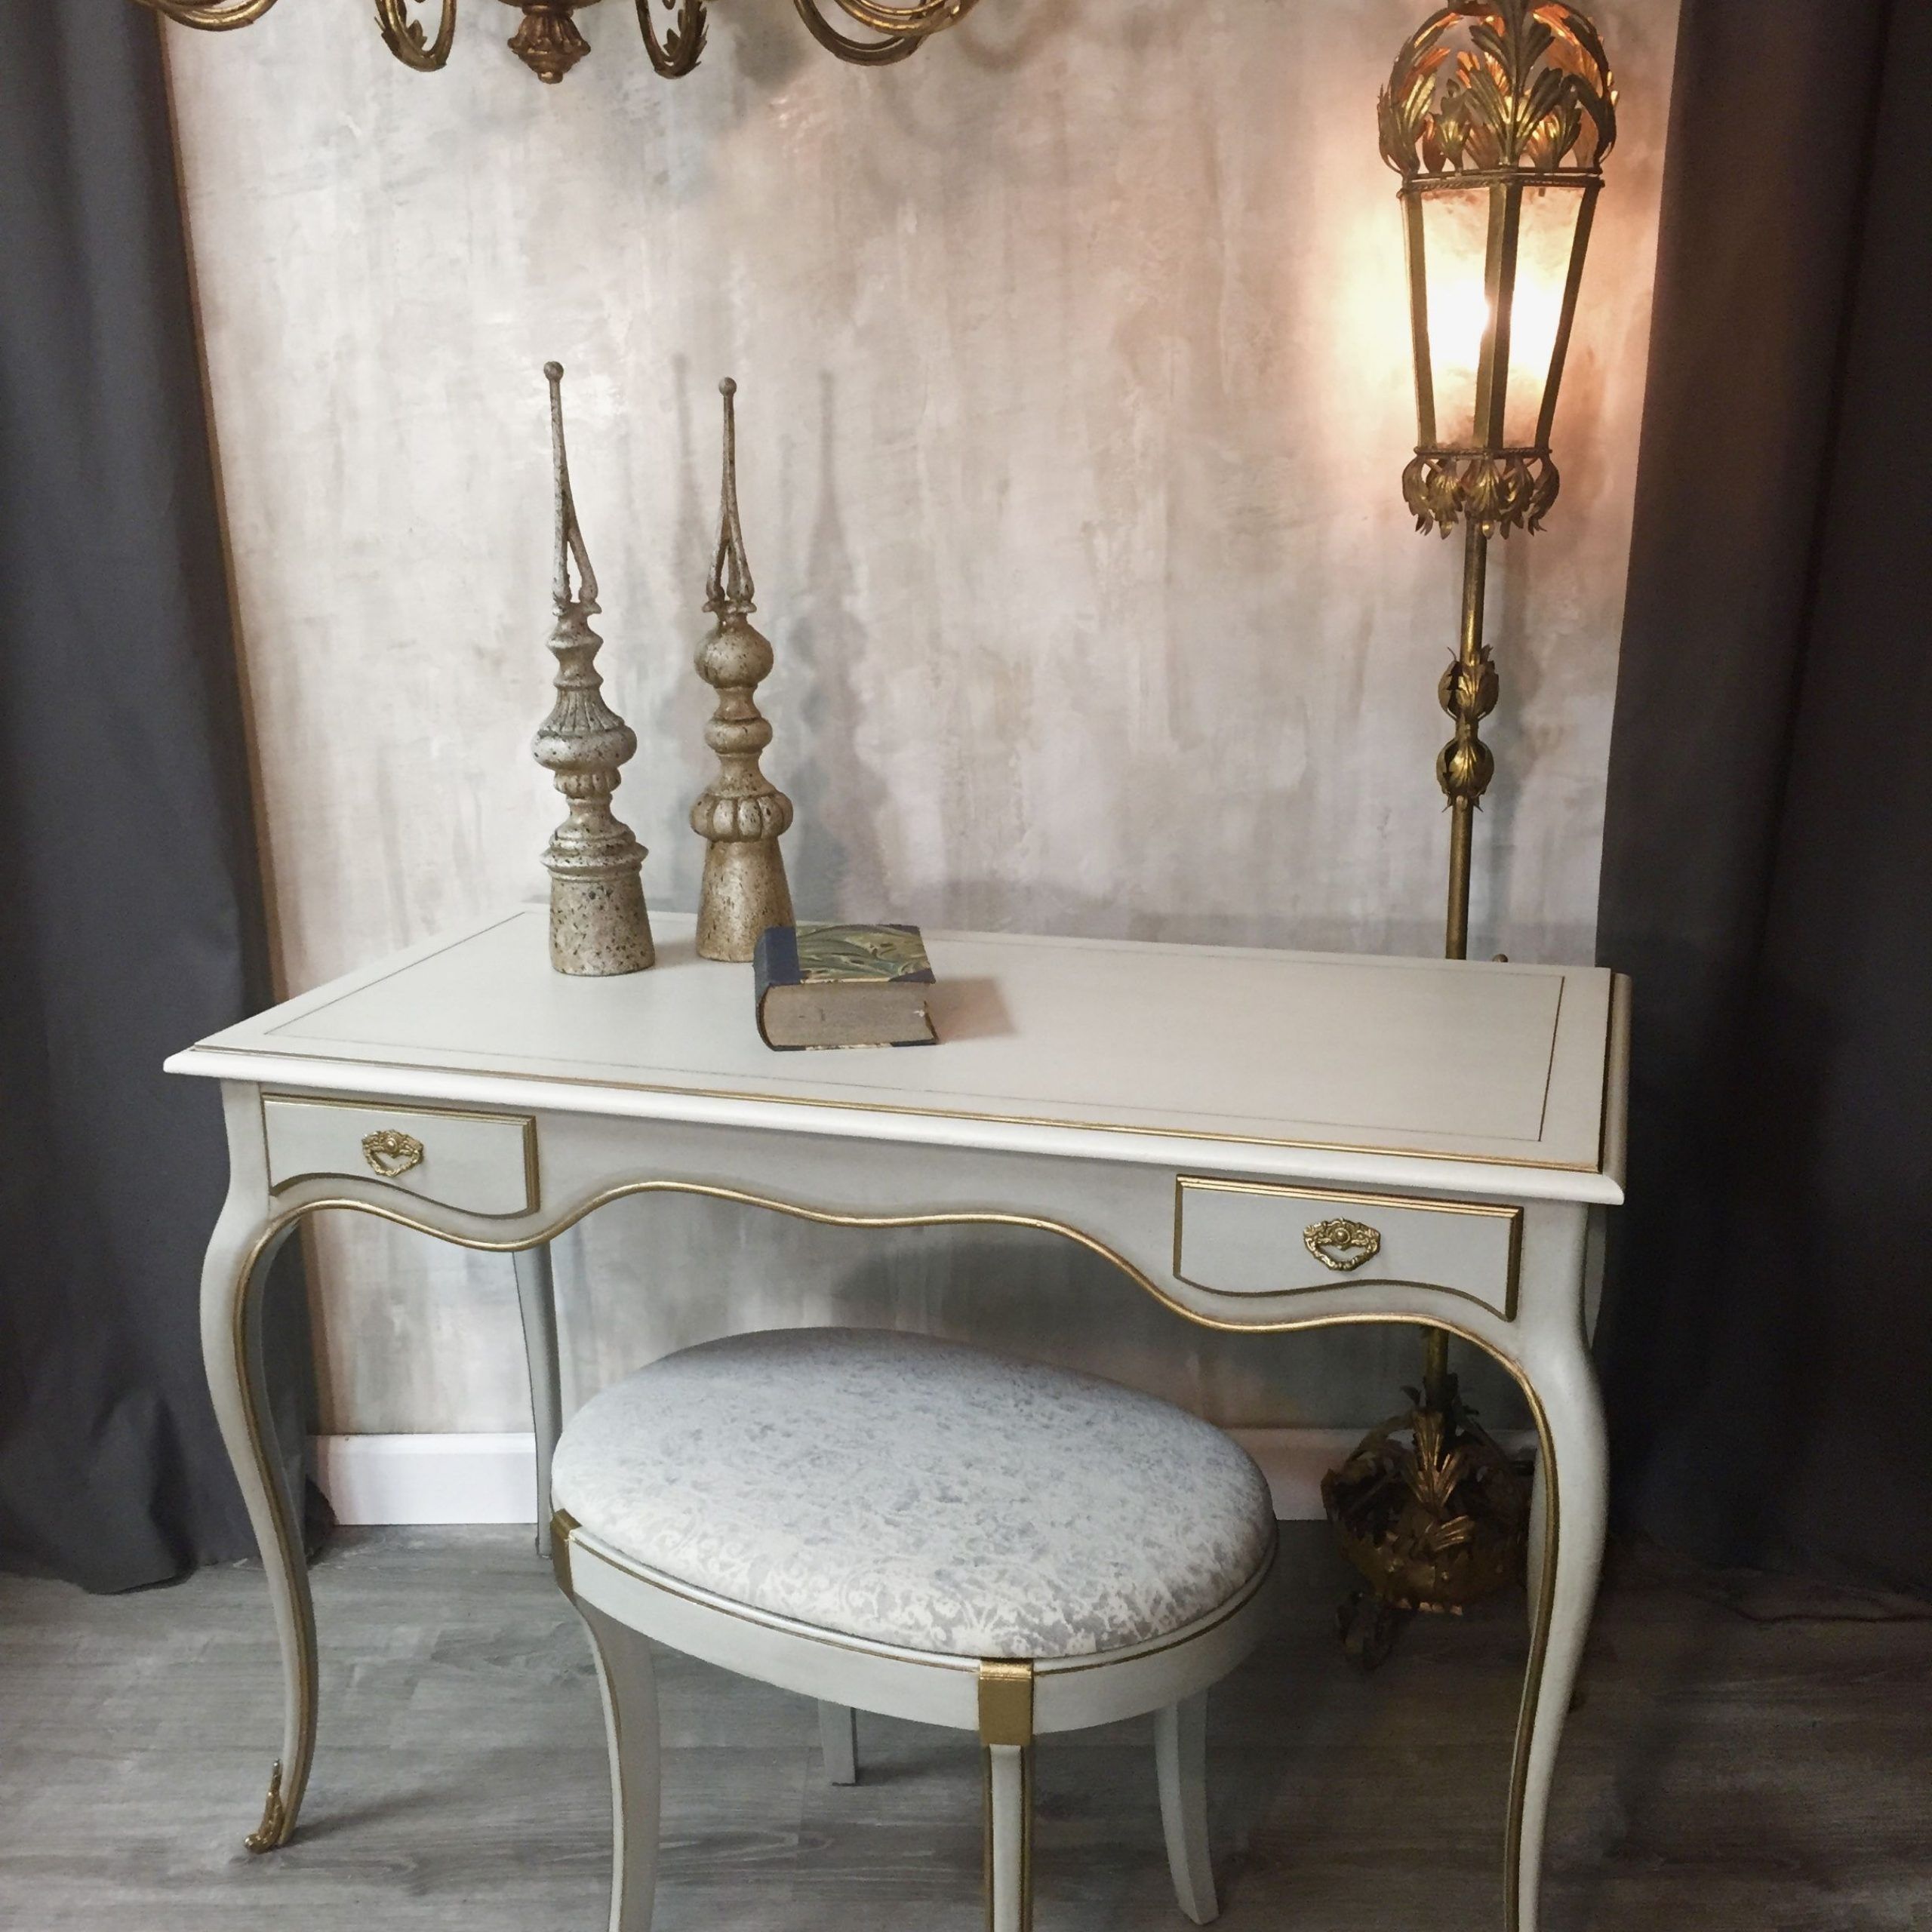 Lovely Desk/ Vanity In Pearlized Grey/blue W/ Gold Detailing And Regarding Gray And Gold 2 Drawer Desks (View 1 of 15)